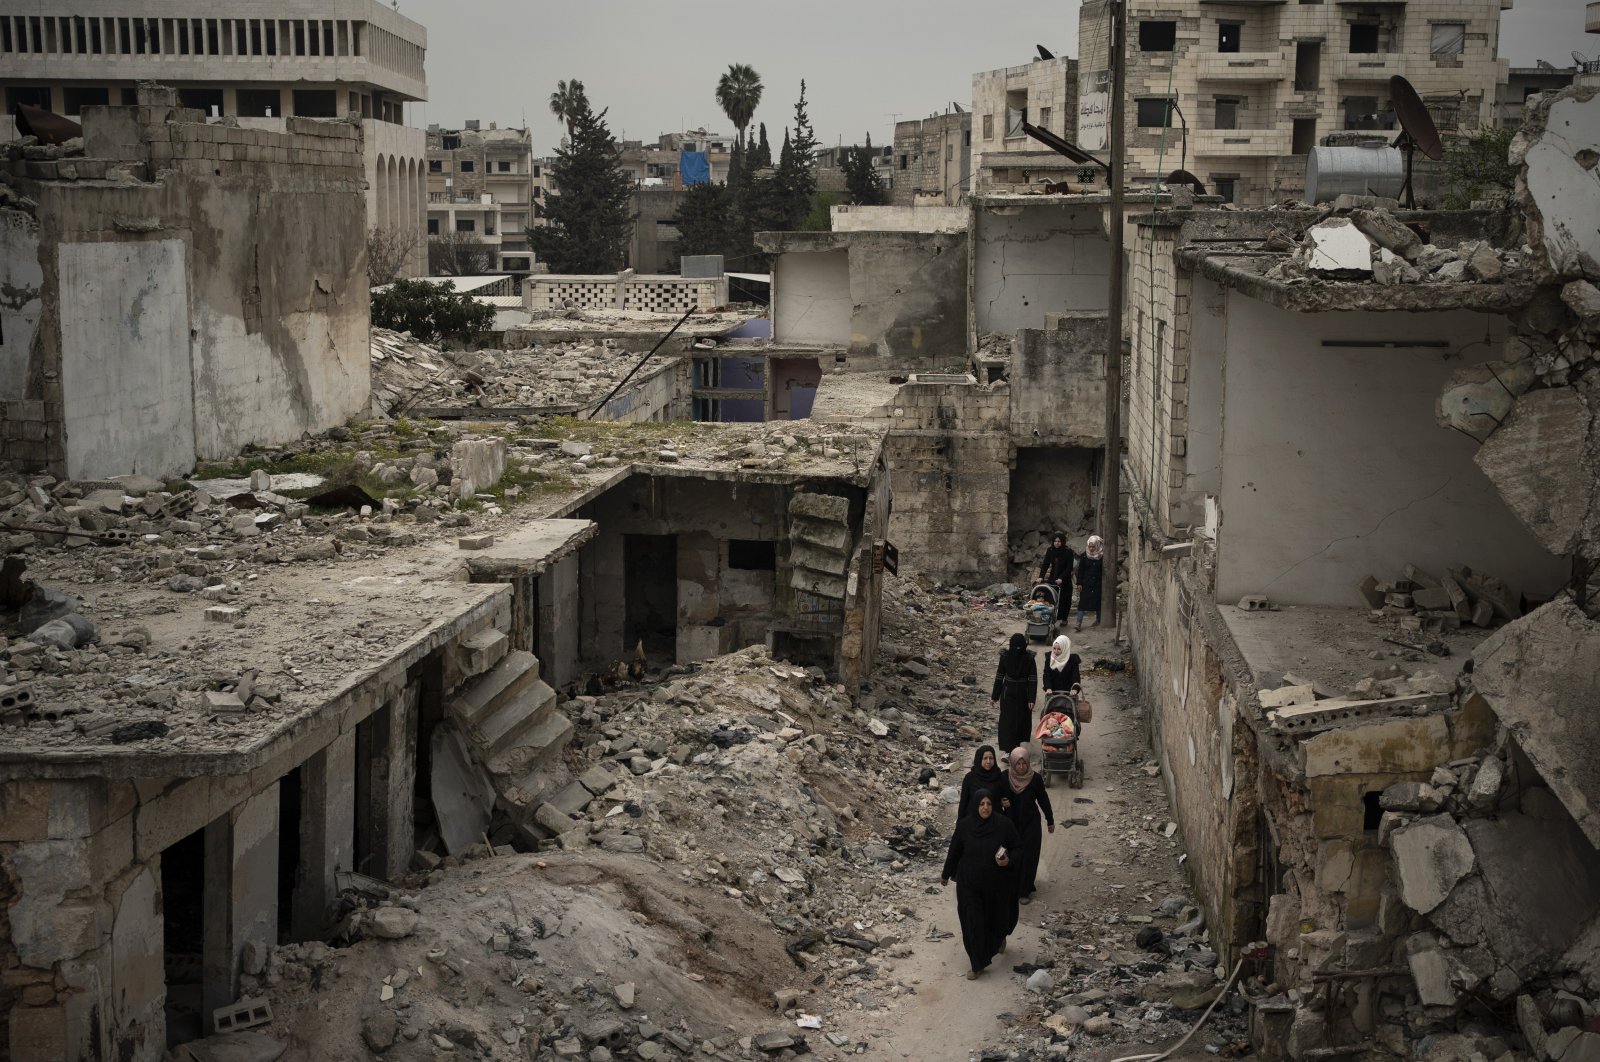 Women walk in a neighborhood heavily damaged by airstrikes in Idlib, Syria, March 12, 2020. (AP File Photo)